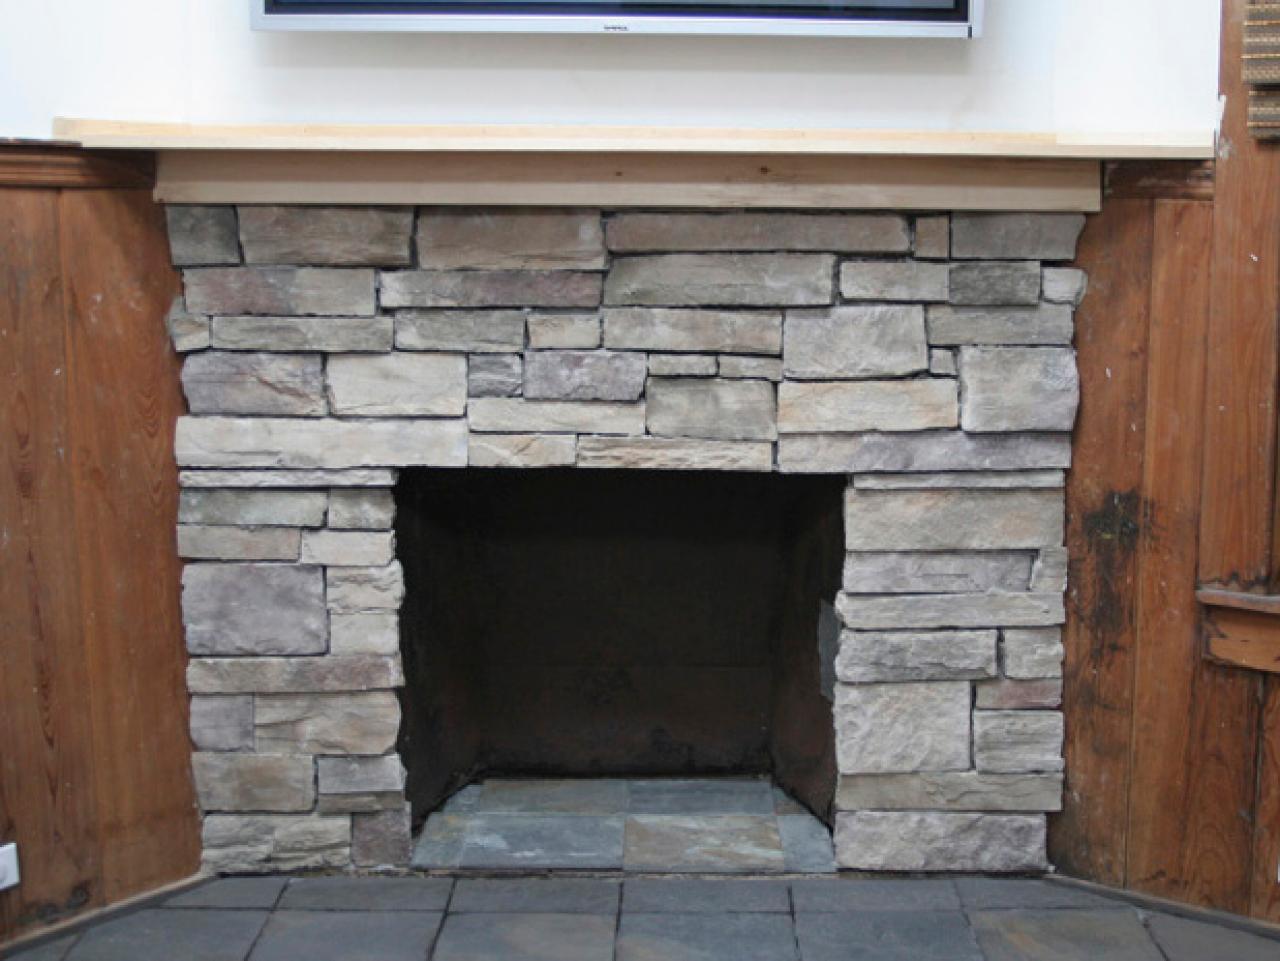 Cover A Brick Fireplace With Stone, How To Lay Natural Stone Fireplace